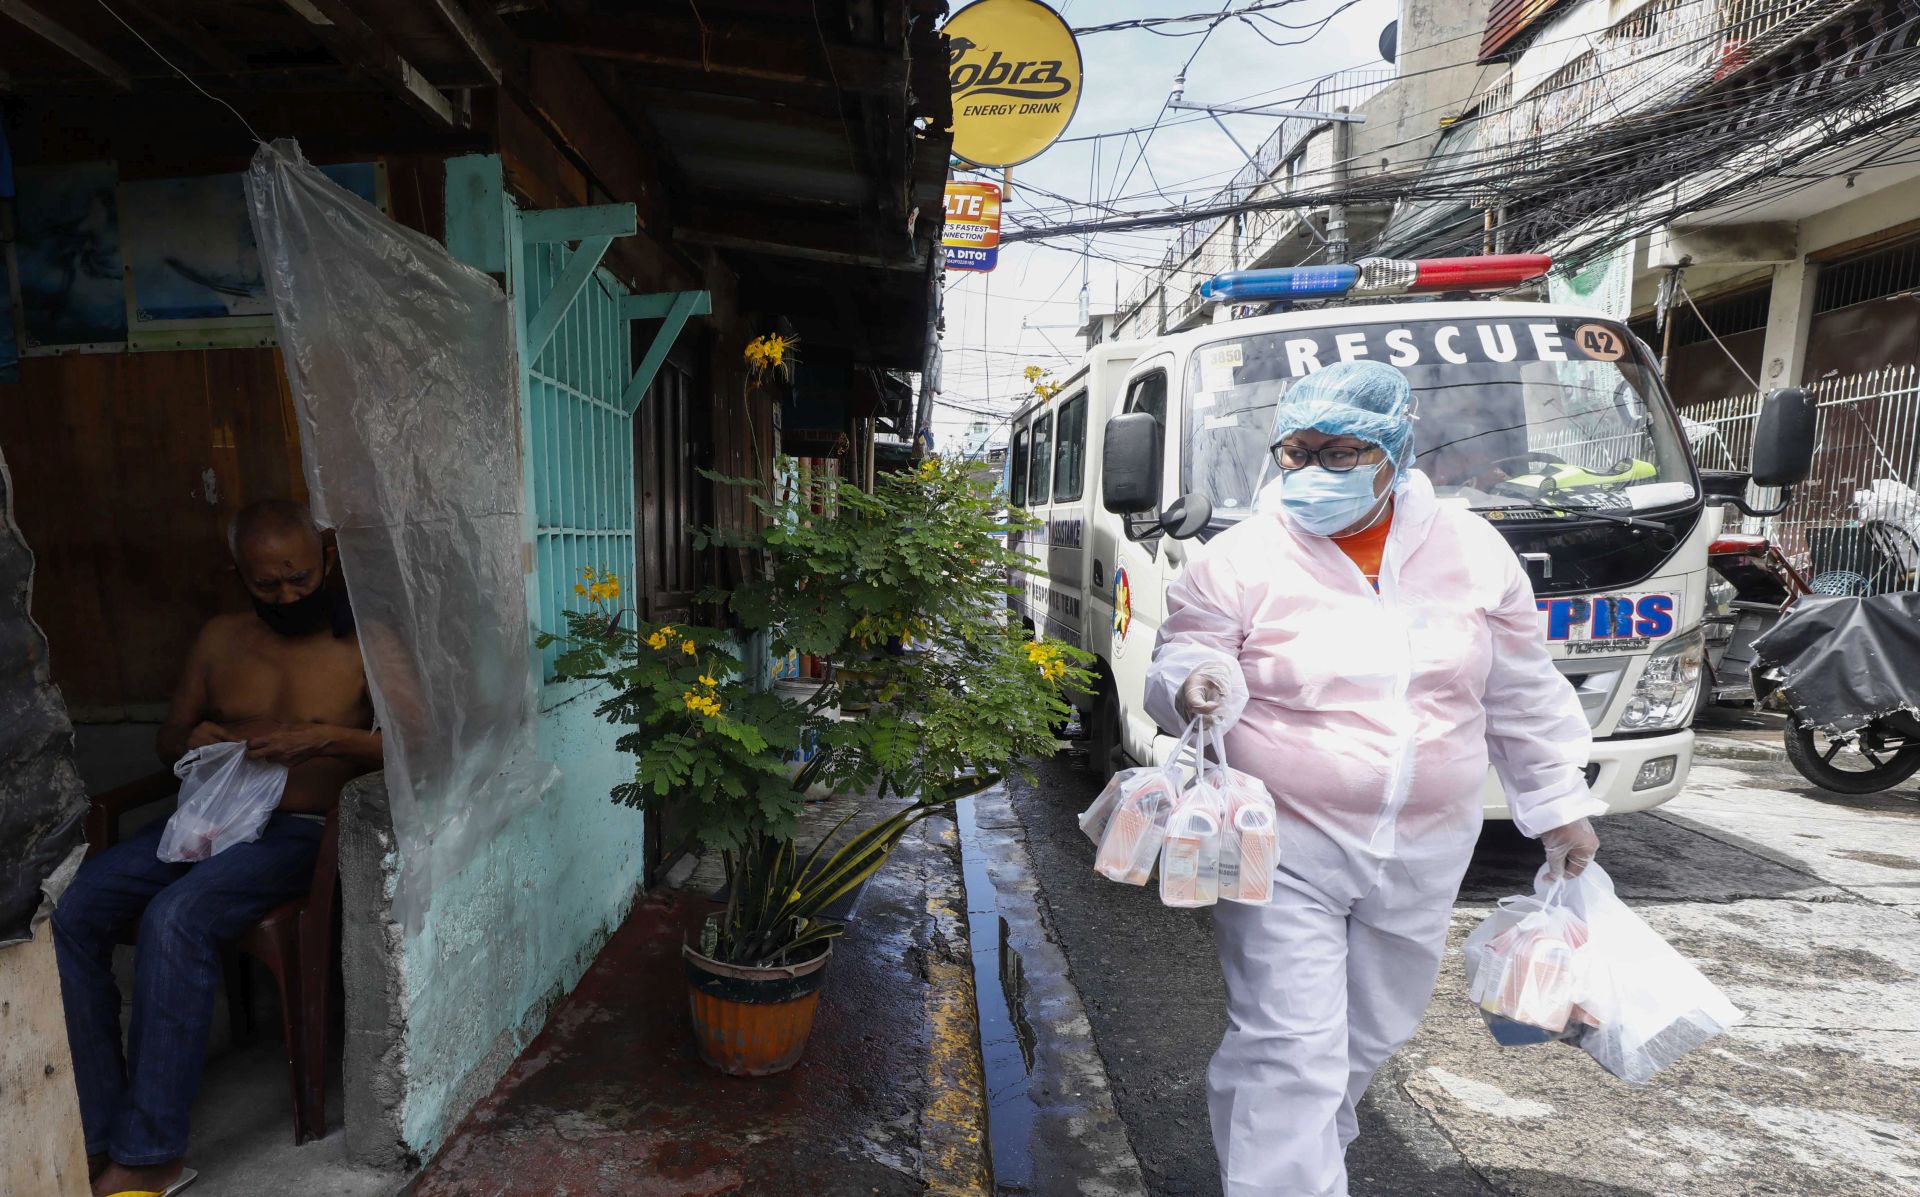 epa08581431 A city worker wearing a protective suit (R) goes around to handout free medicine and vitamins at a village under quarantine protocols in Caloocan City, Metro Manila, Philippines 03 August 2020. Philippine President Rodrigo Duterte approved a recommendation to impose stricter quarantine protocols from 04 to 18 August in Metro Manila and the nearby provinces of Laguna, Cavite, Rizal and Bulacan. The move came after pleas from medical professionals for tighter measures due to rising coronavirus disease (COVID-19) cases.  EPA/ROLEX DELA PENA